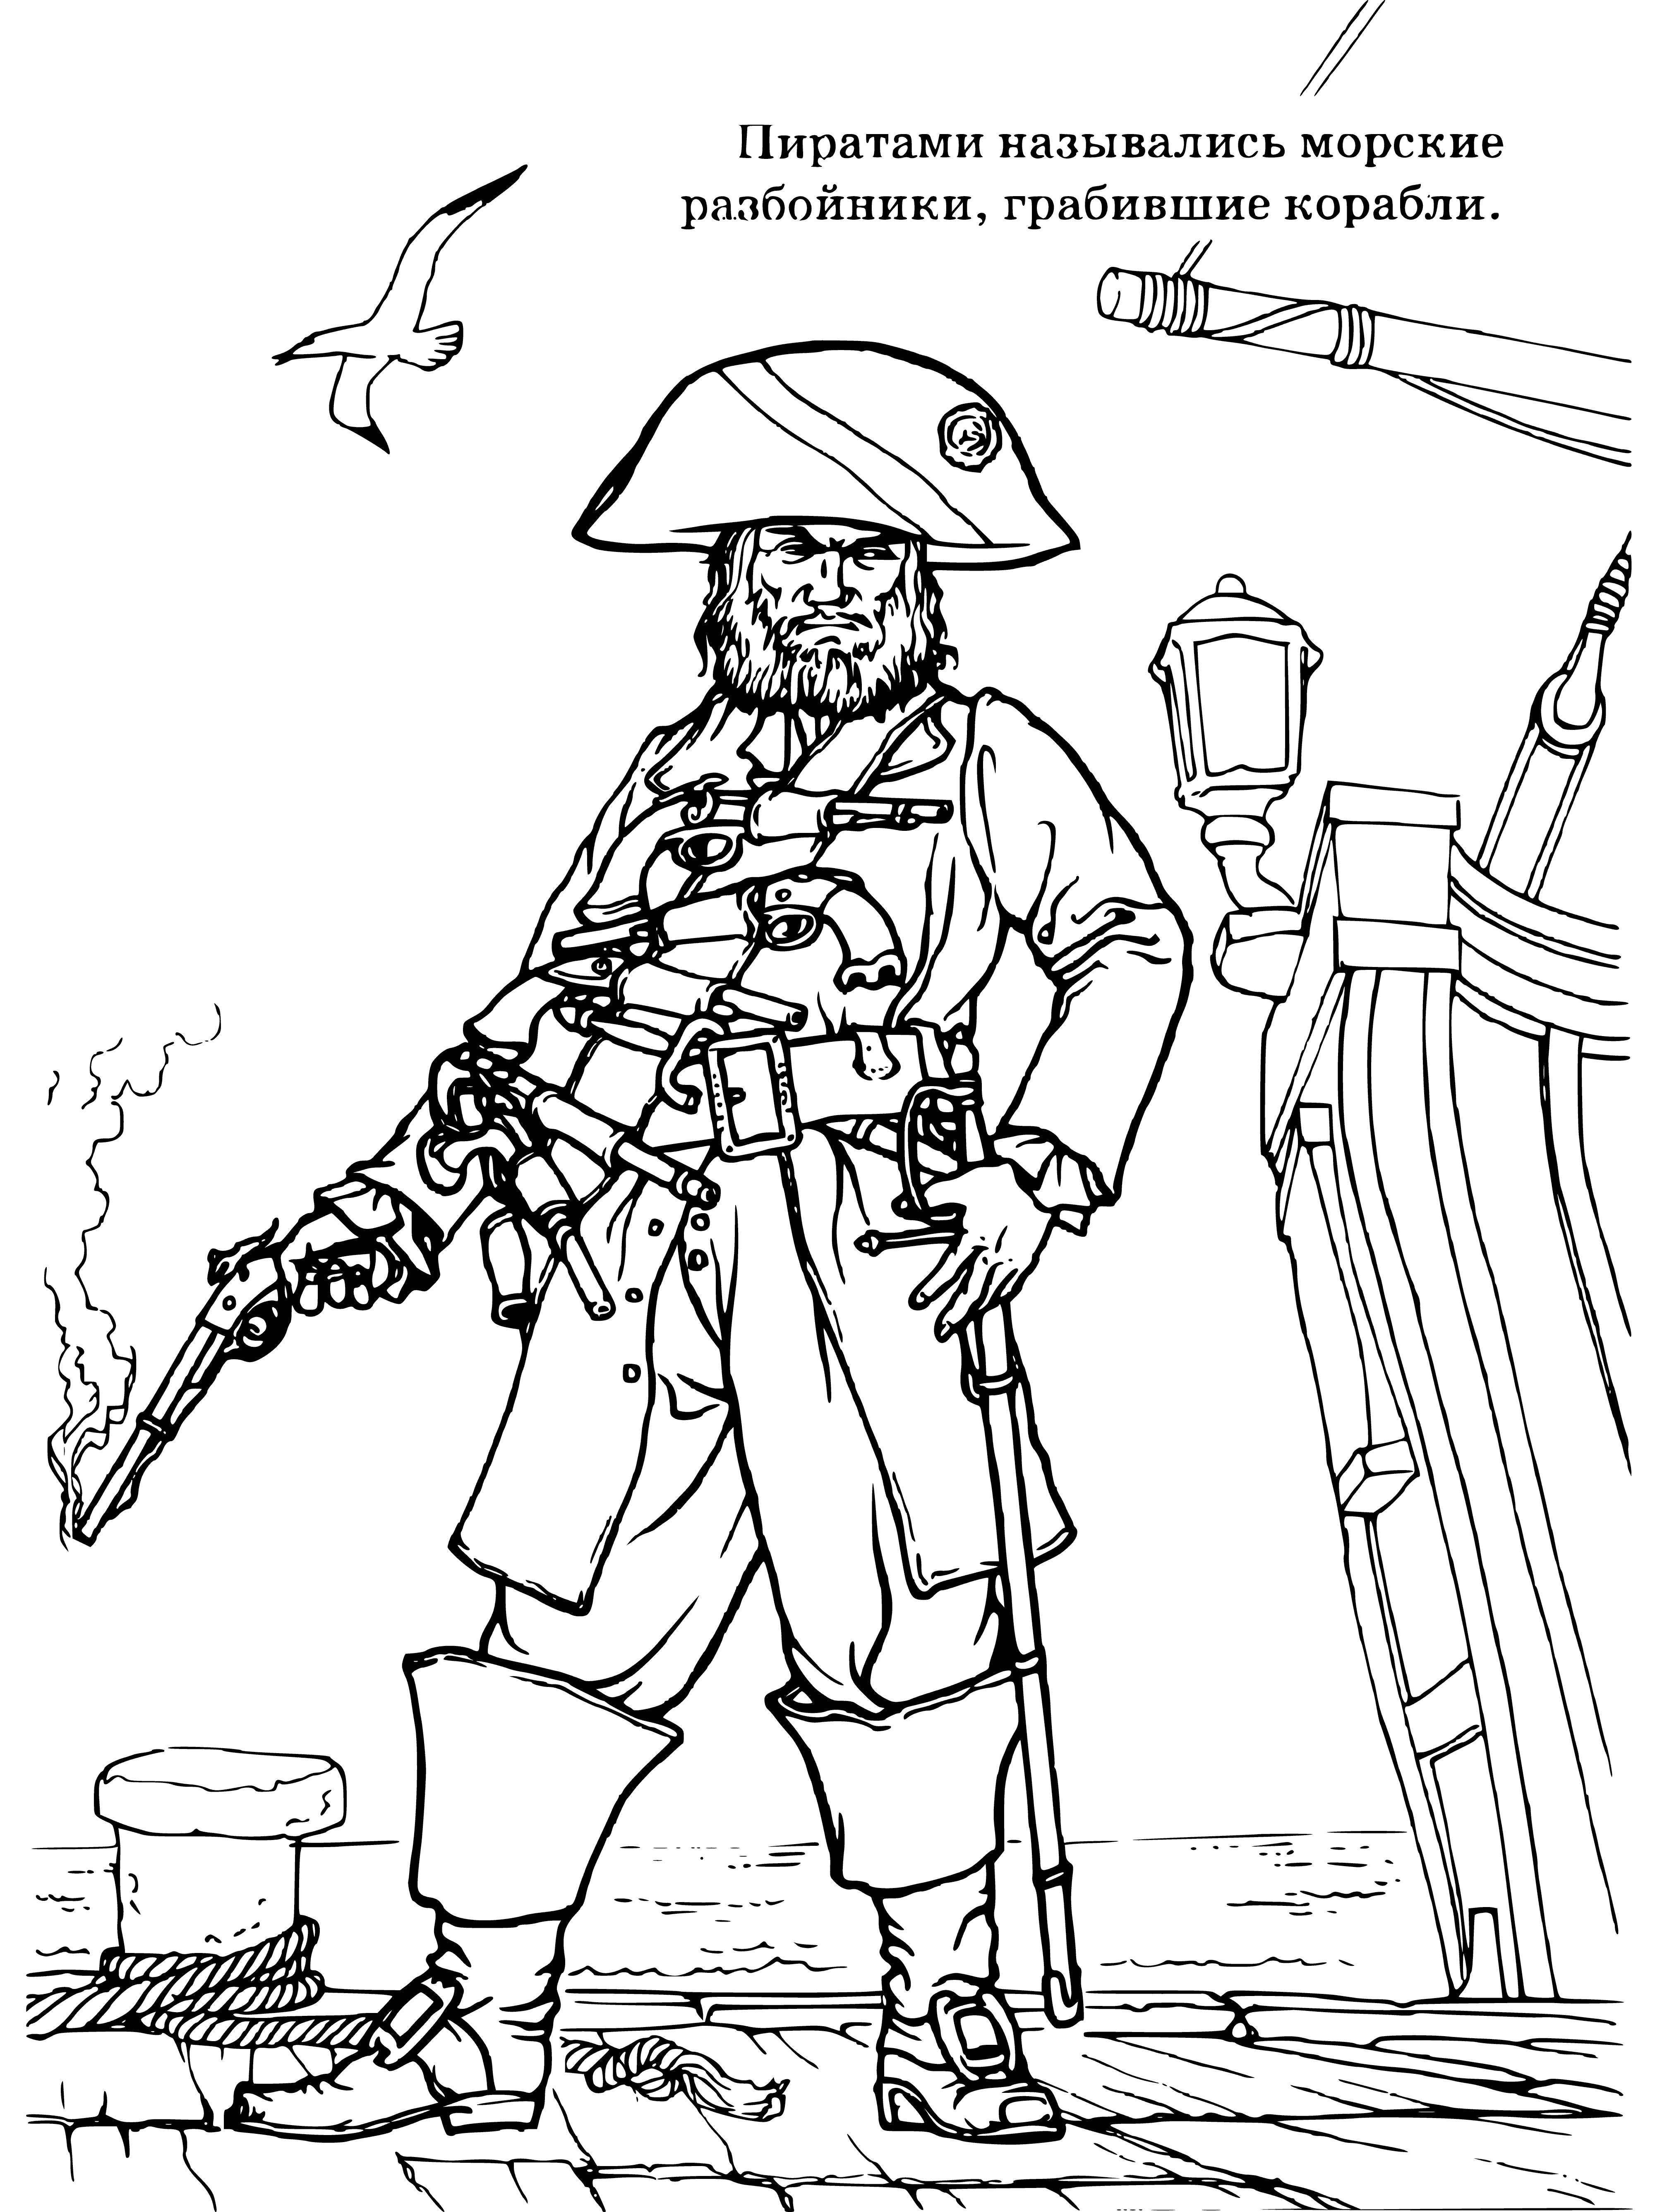 coloring page: Group of men stand on deck of ship in uniforms, some with guns. Flag flying; large cannon visible.